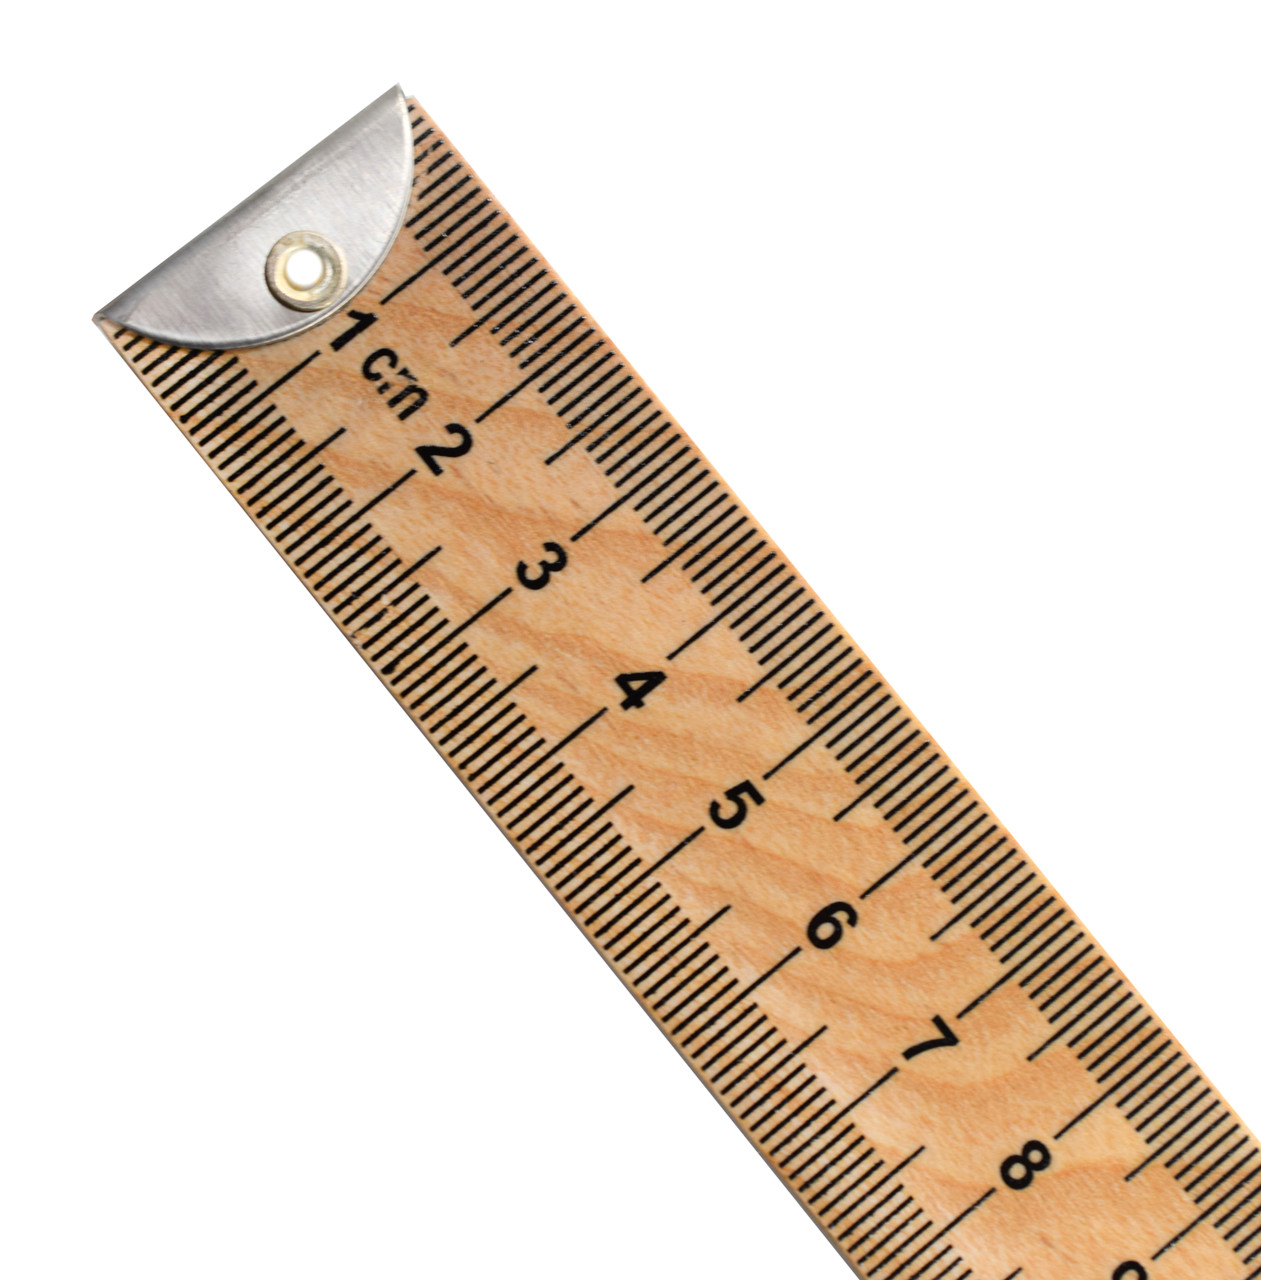 Learning Resources Wooden Meter Stick, Plain Ends, Pack of 3